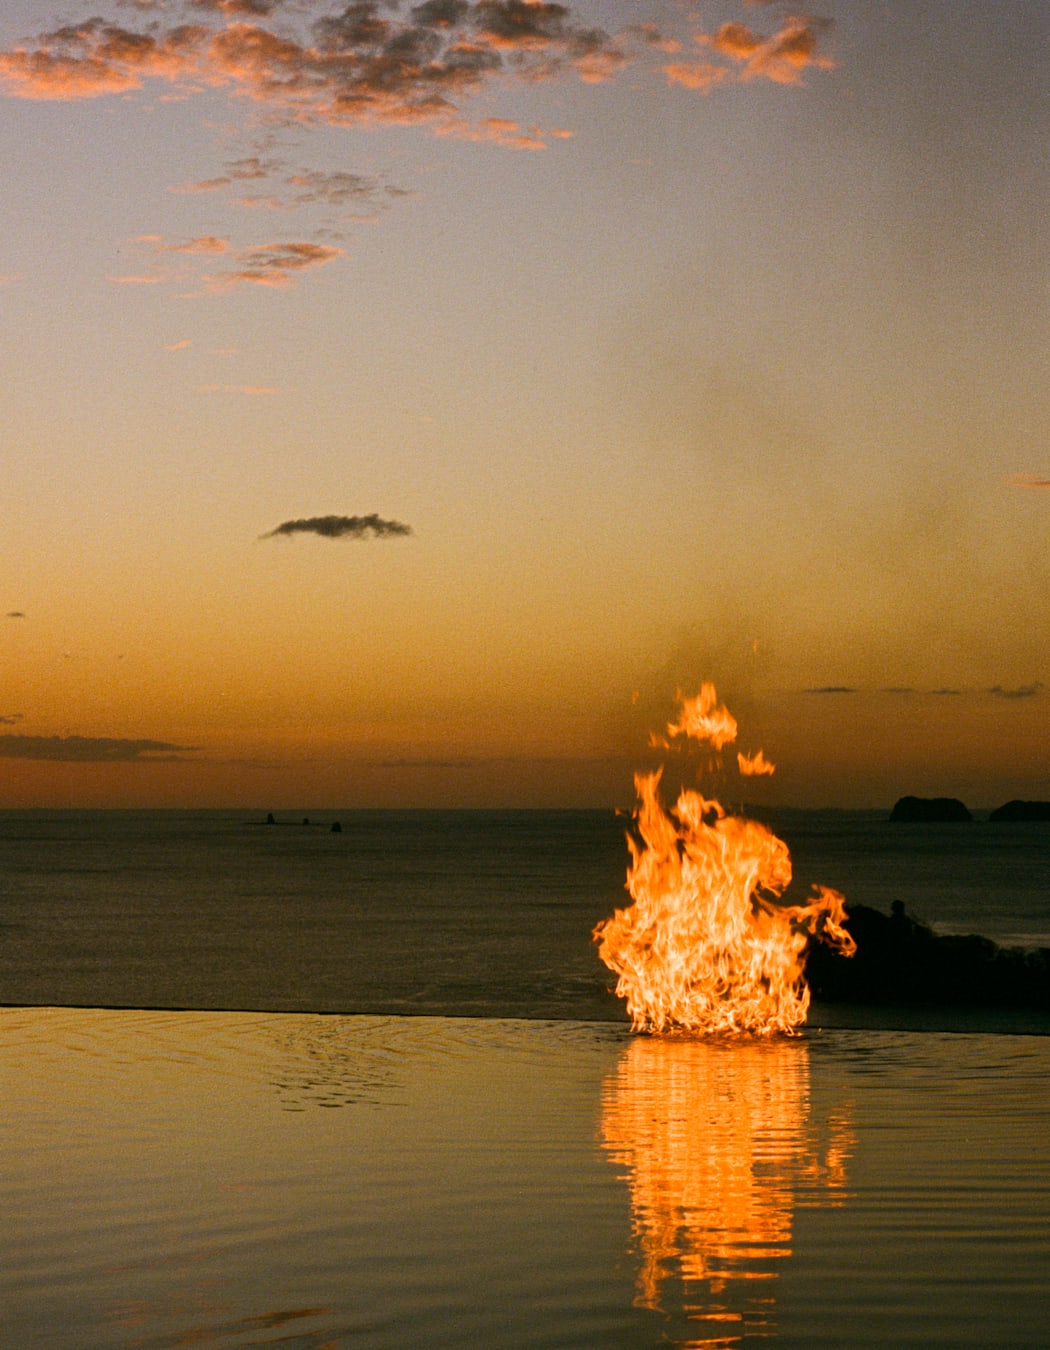 A fire burns by the edge of an infinity pool, looking over the ocean as the sun sets.